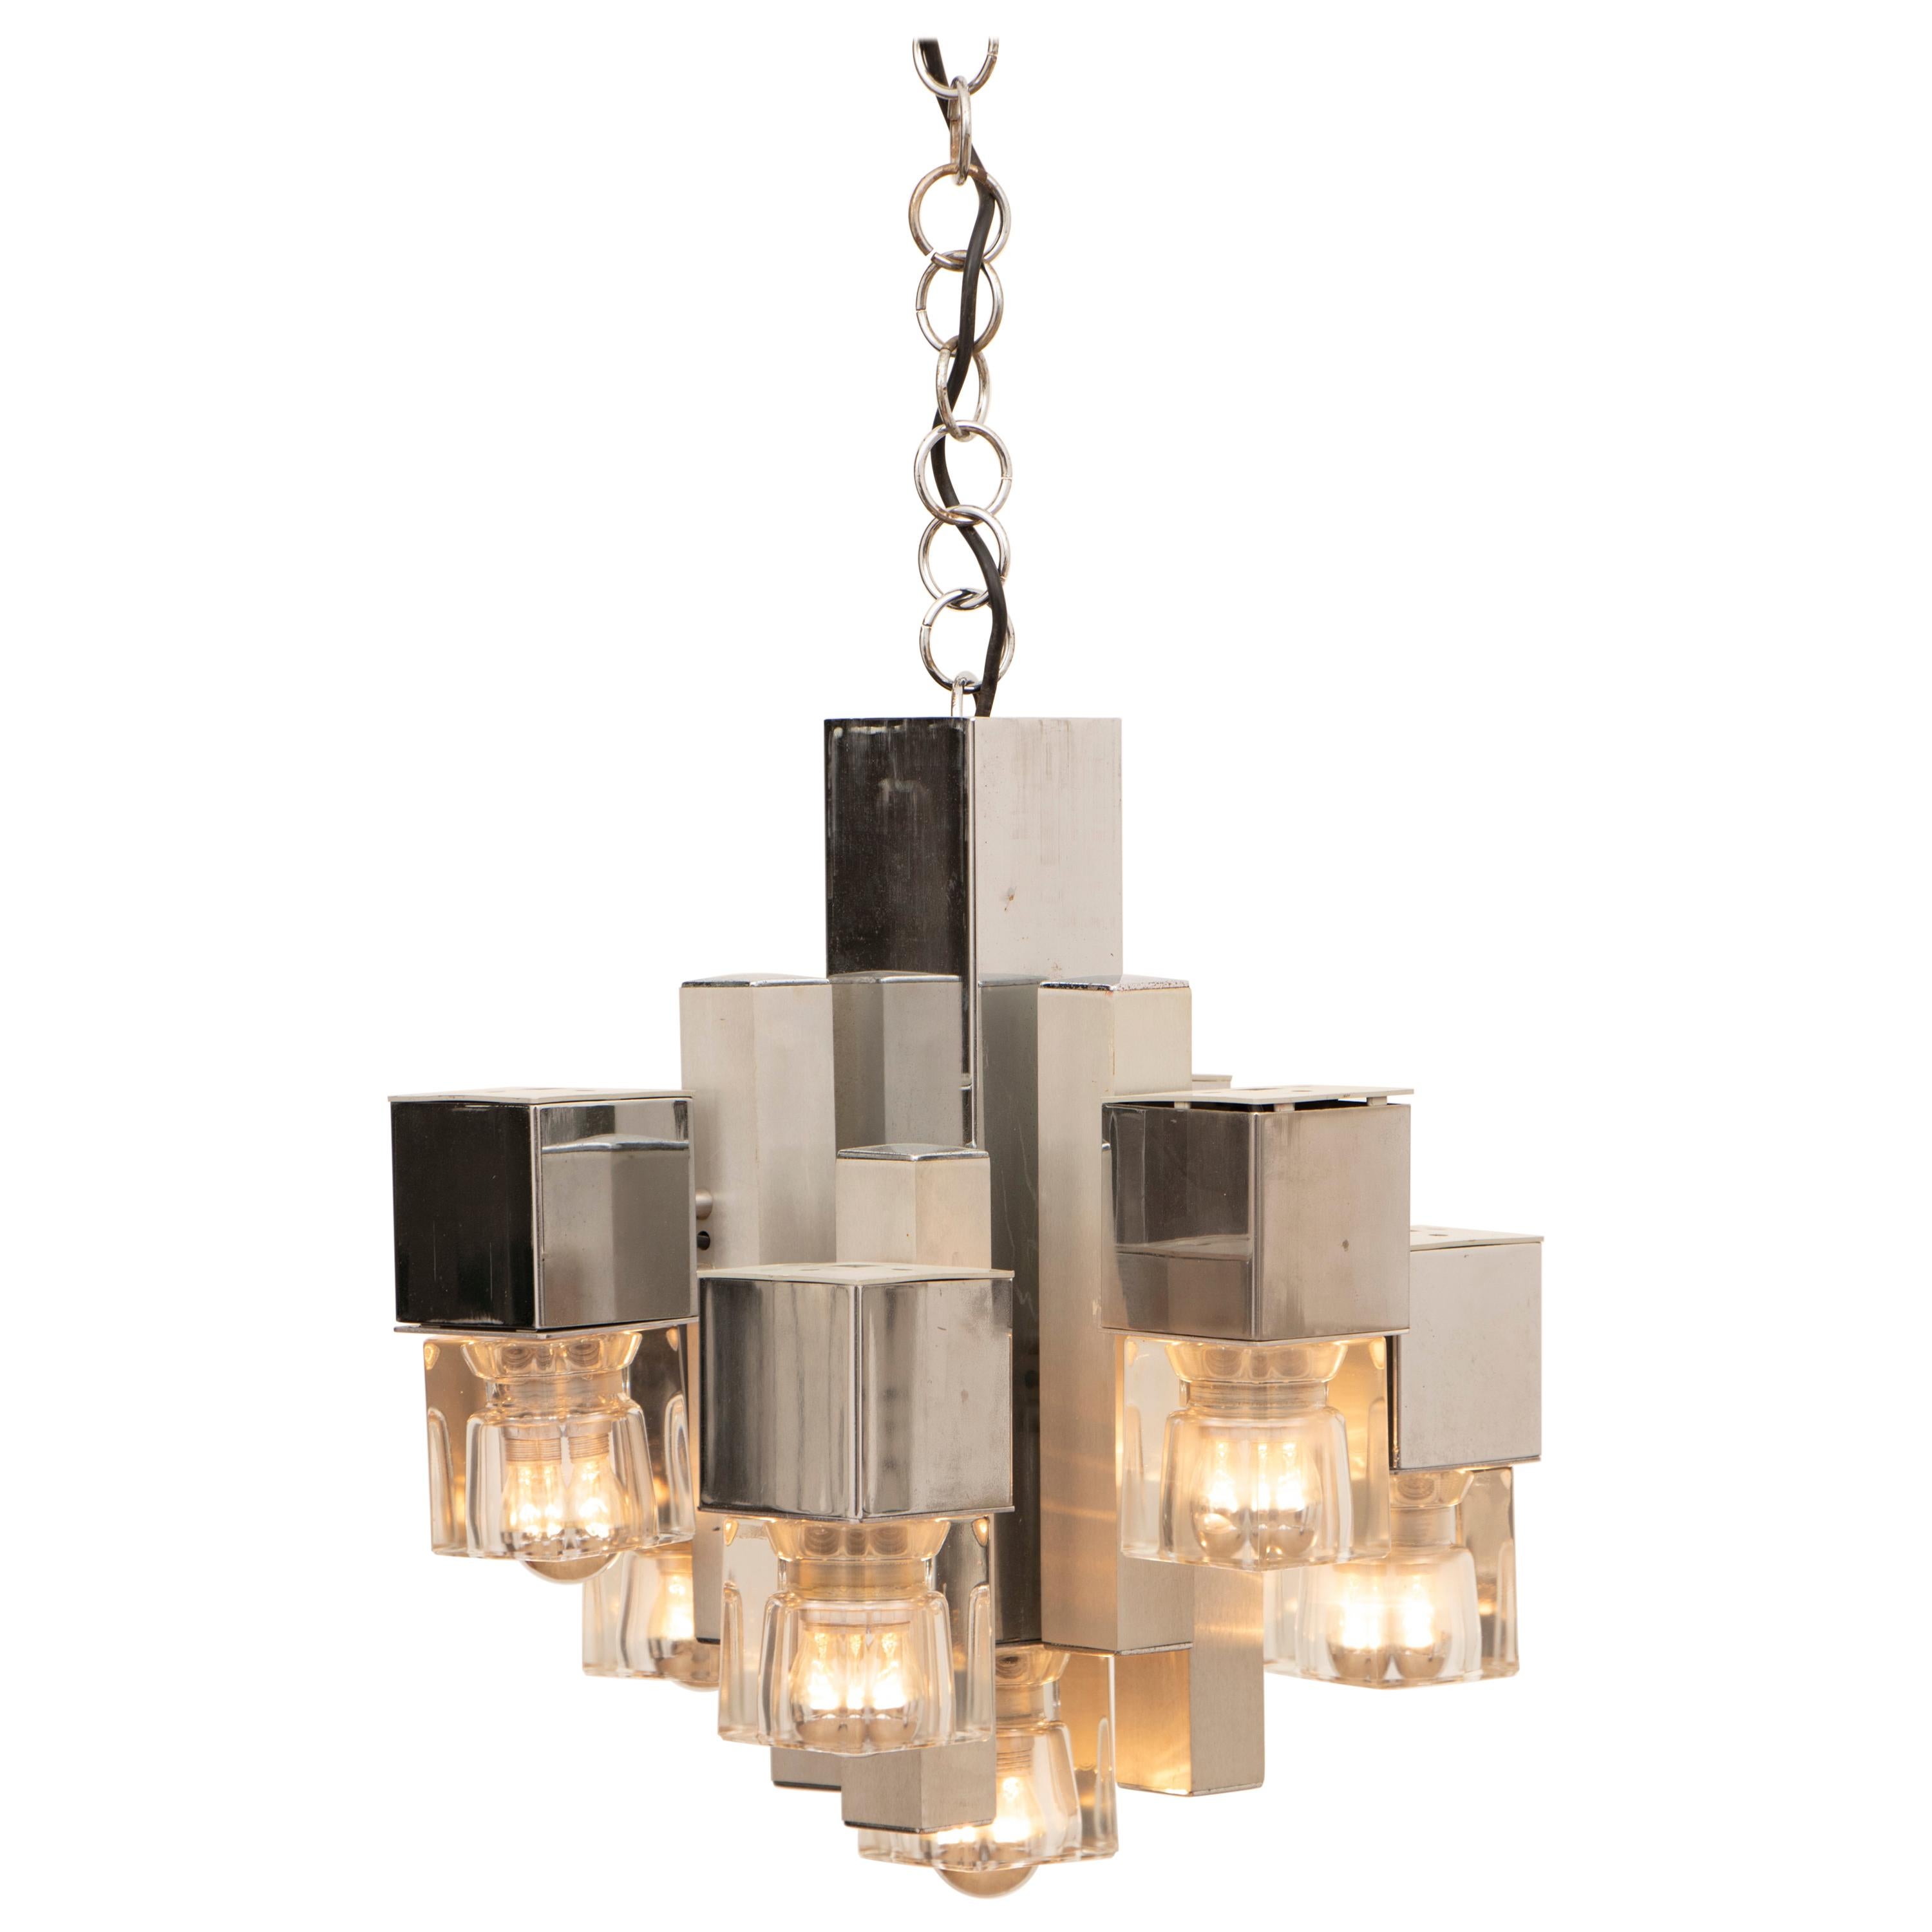 1970s Sciolari Chrome & Glass Cubic Abstract Hanging Light Chandelier